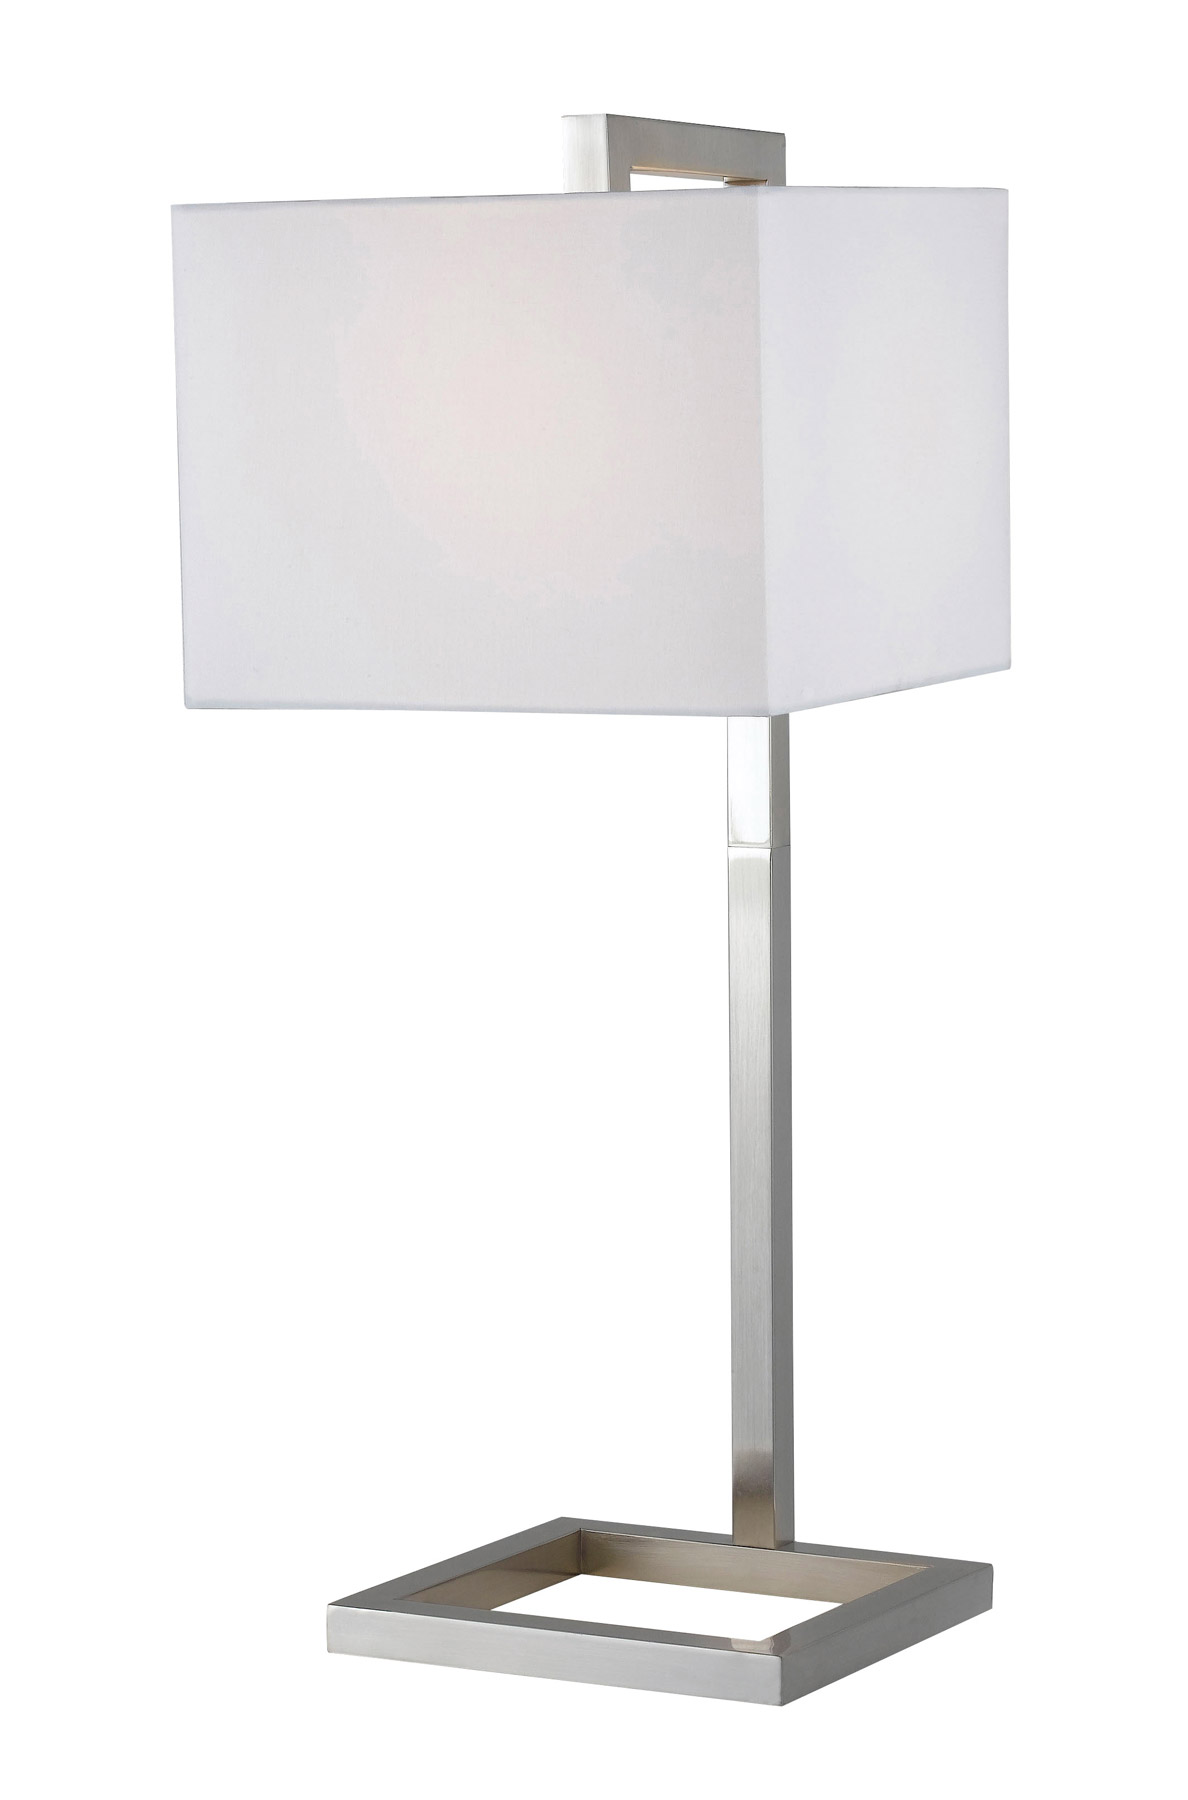 Square table lamps - easy to portable and cheap to acquire - Warisan